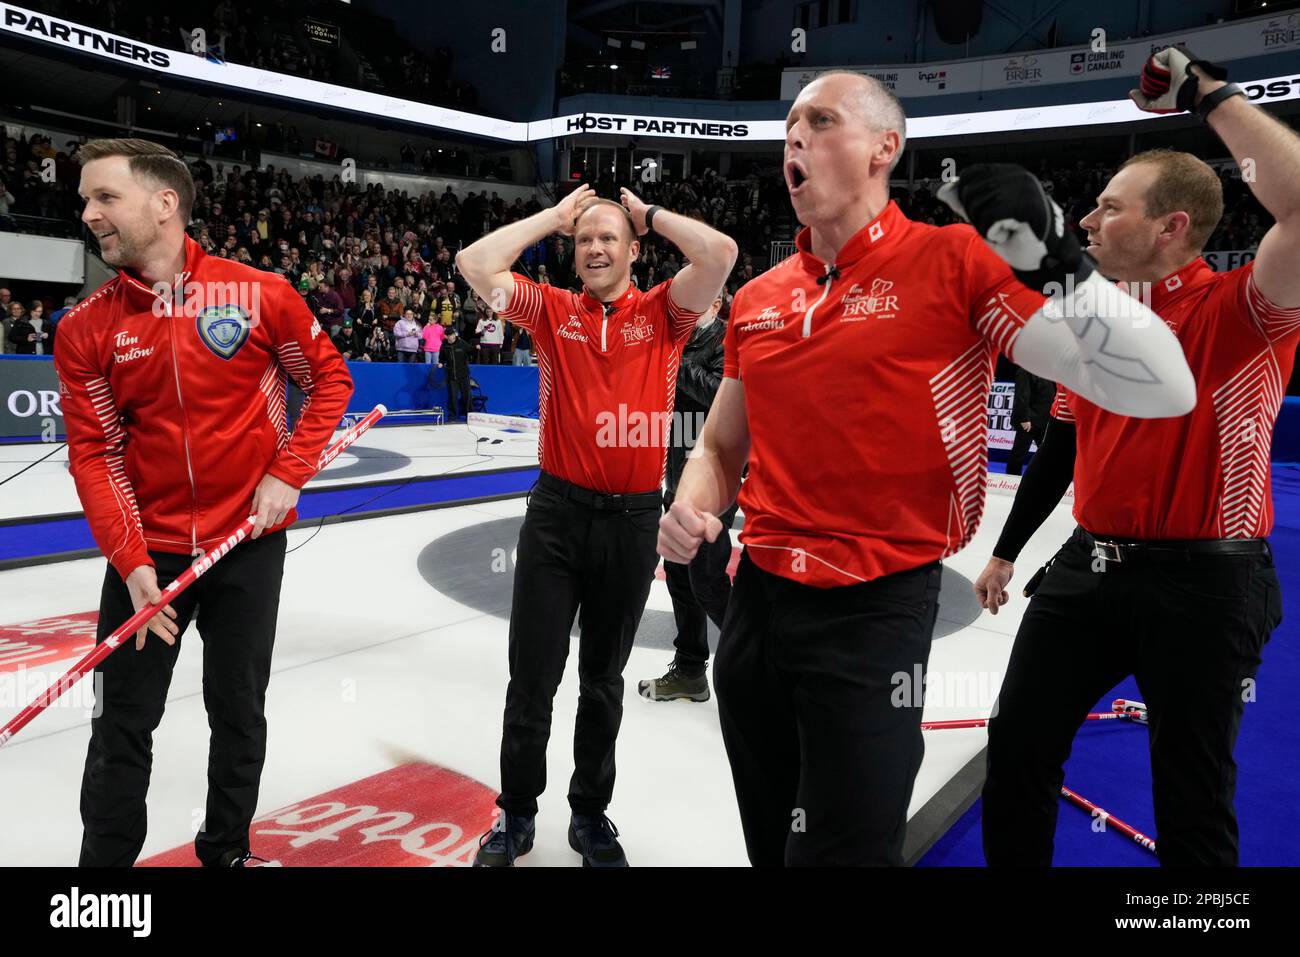 From left to right, Team Canada skip Brad Gushue, Mark Nichols, EJ Harnden and Geoff Walker celebrate after defeating Team Manitoba in the finals of the Tim Hortons Brier curling event in